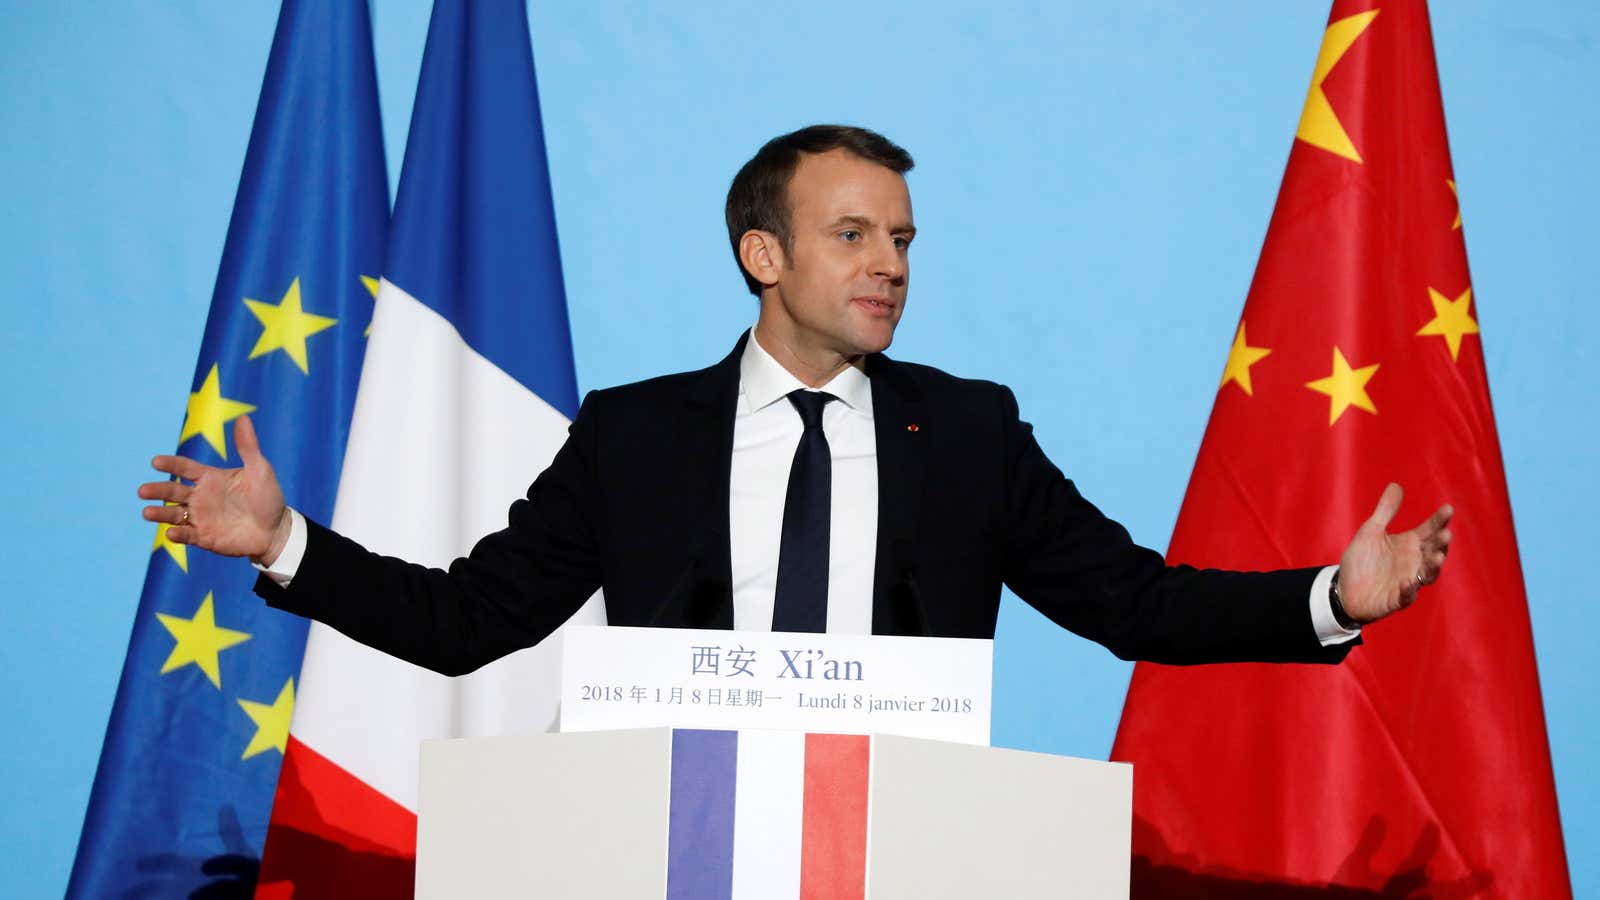 “The future needs France, Europe and China.”